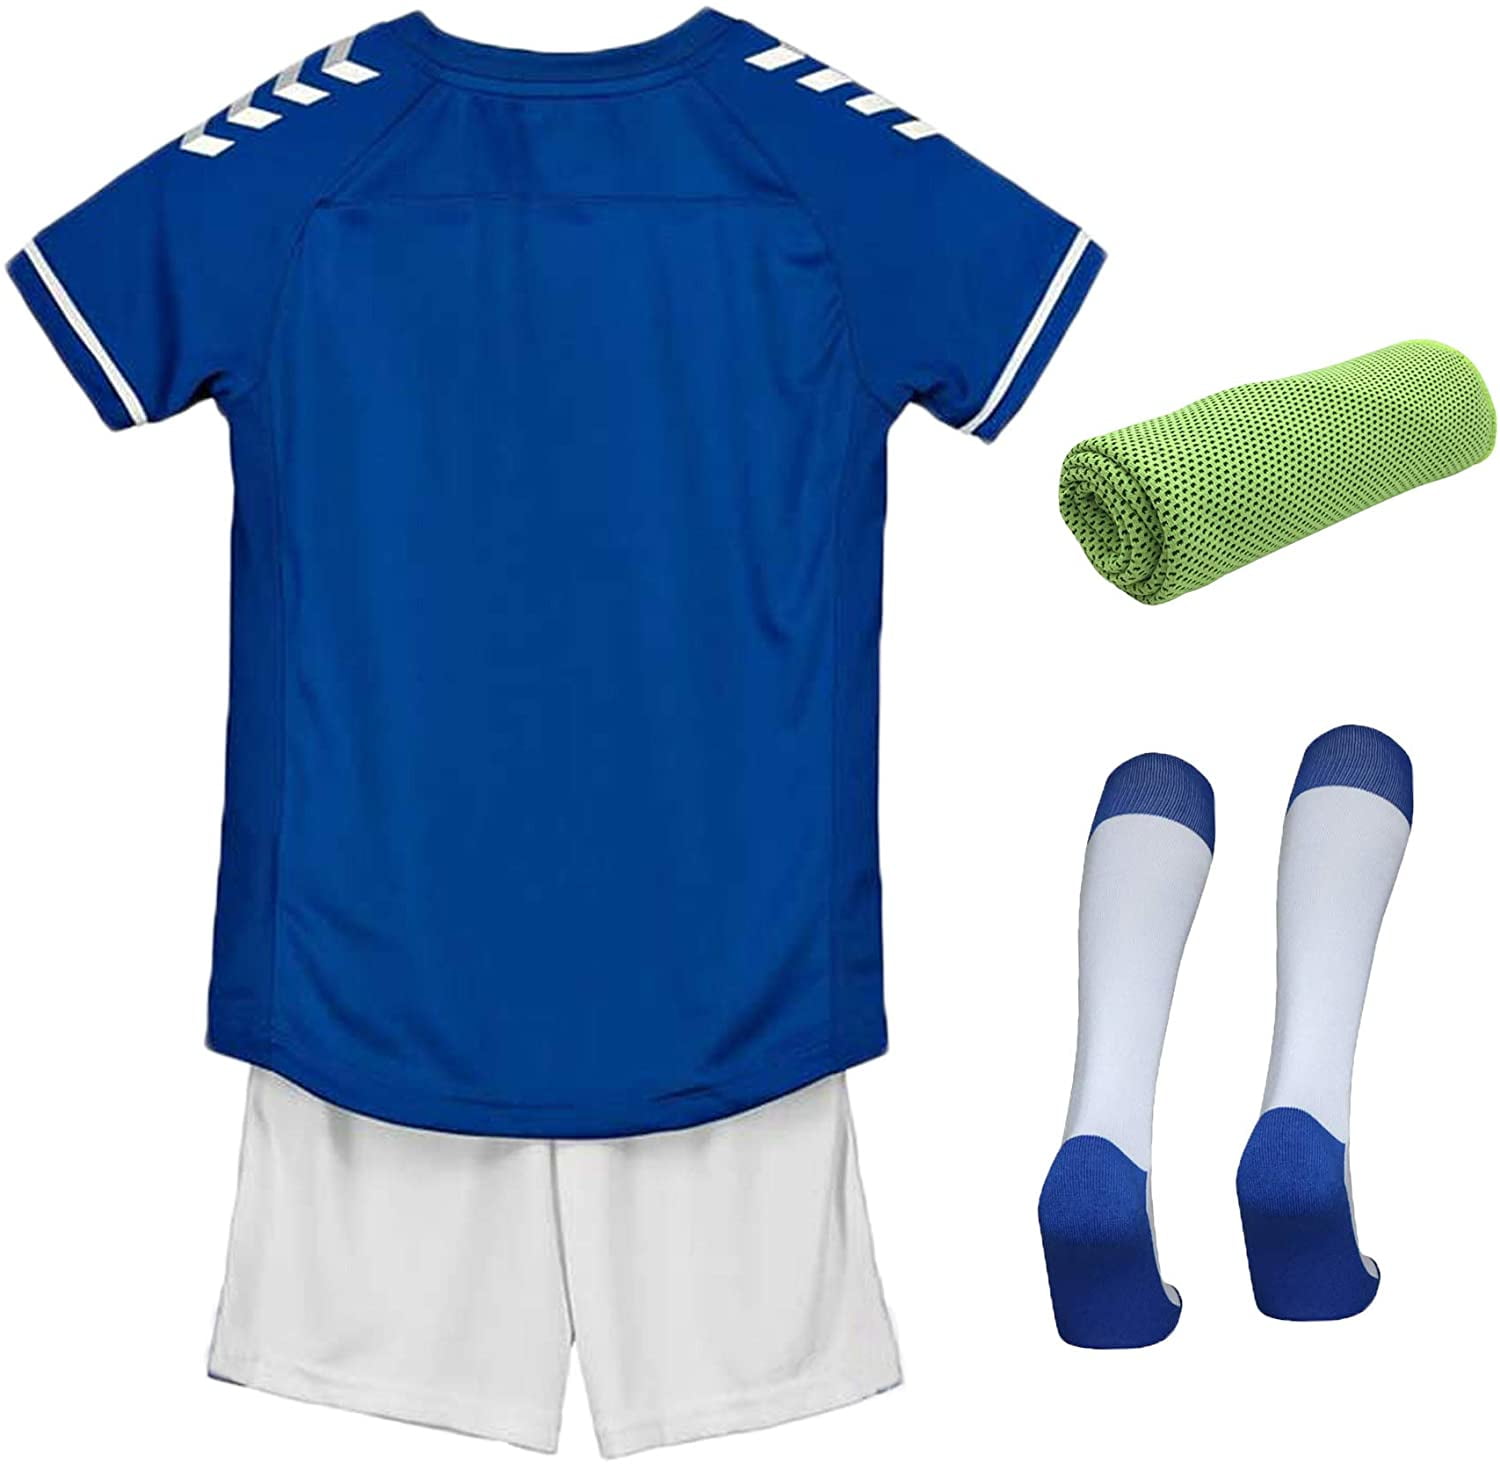 ROLY Sports Kit package 2 Shirts Plus 1 Pair of Shorts Blue/White 100% polyester 